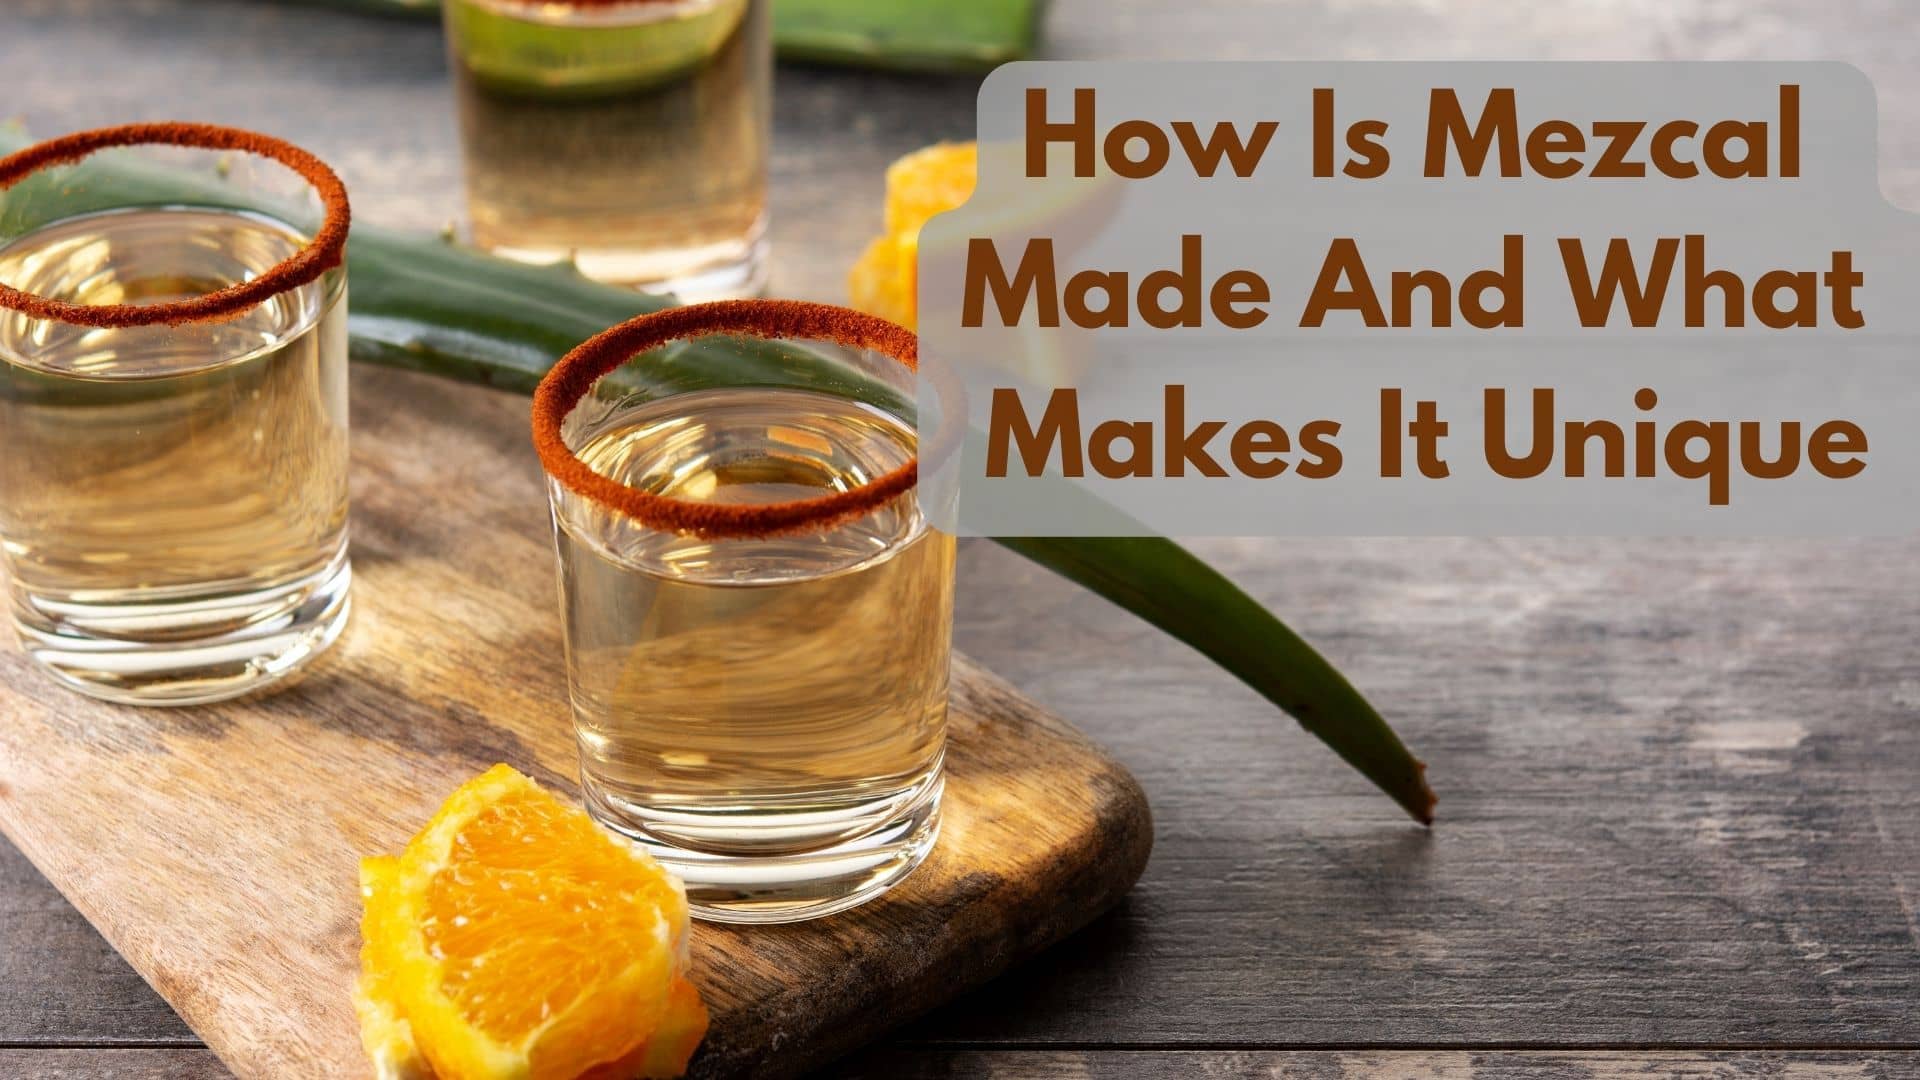 How Is Mezcal Made And What Makes It Unique?